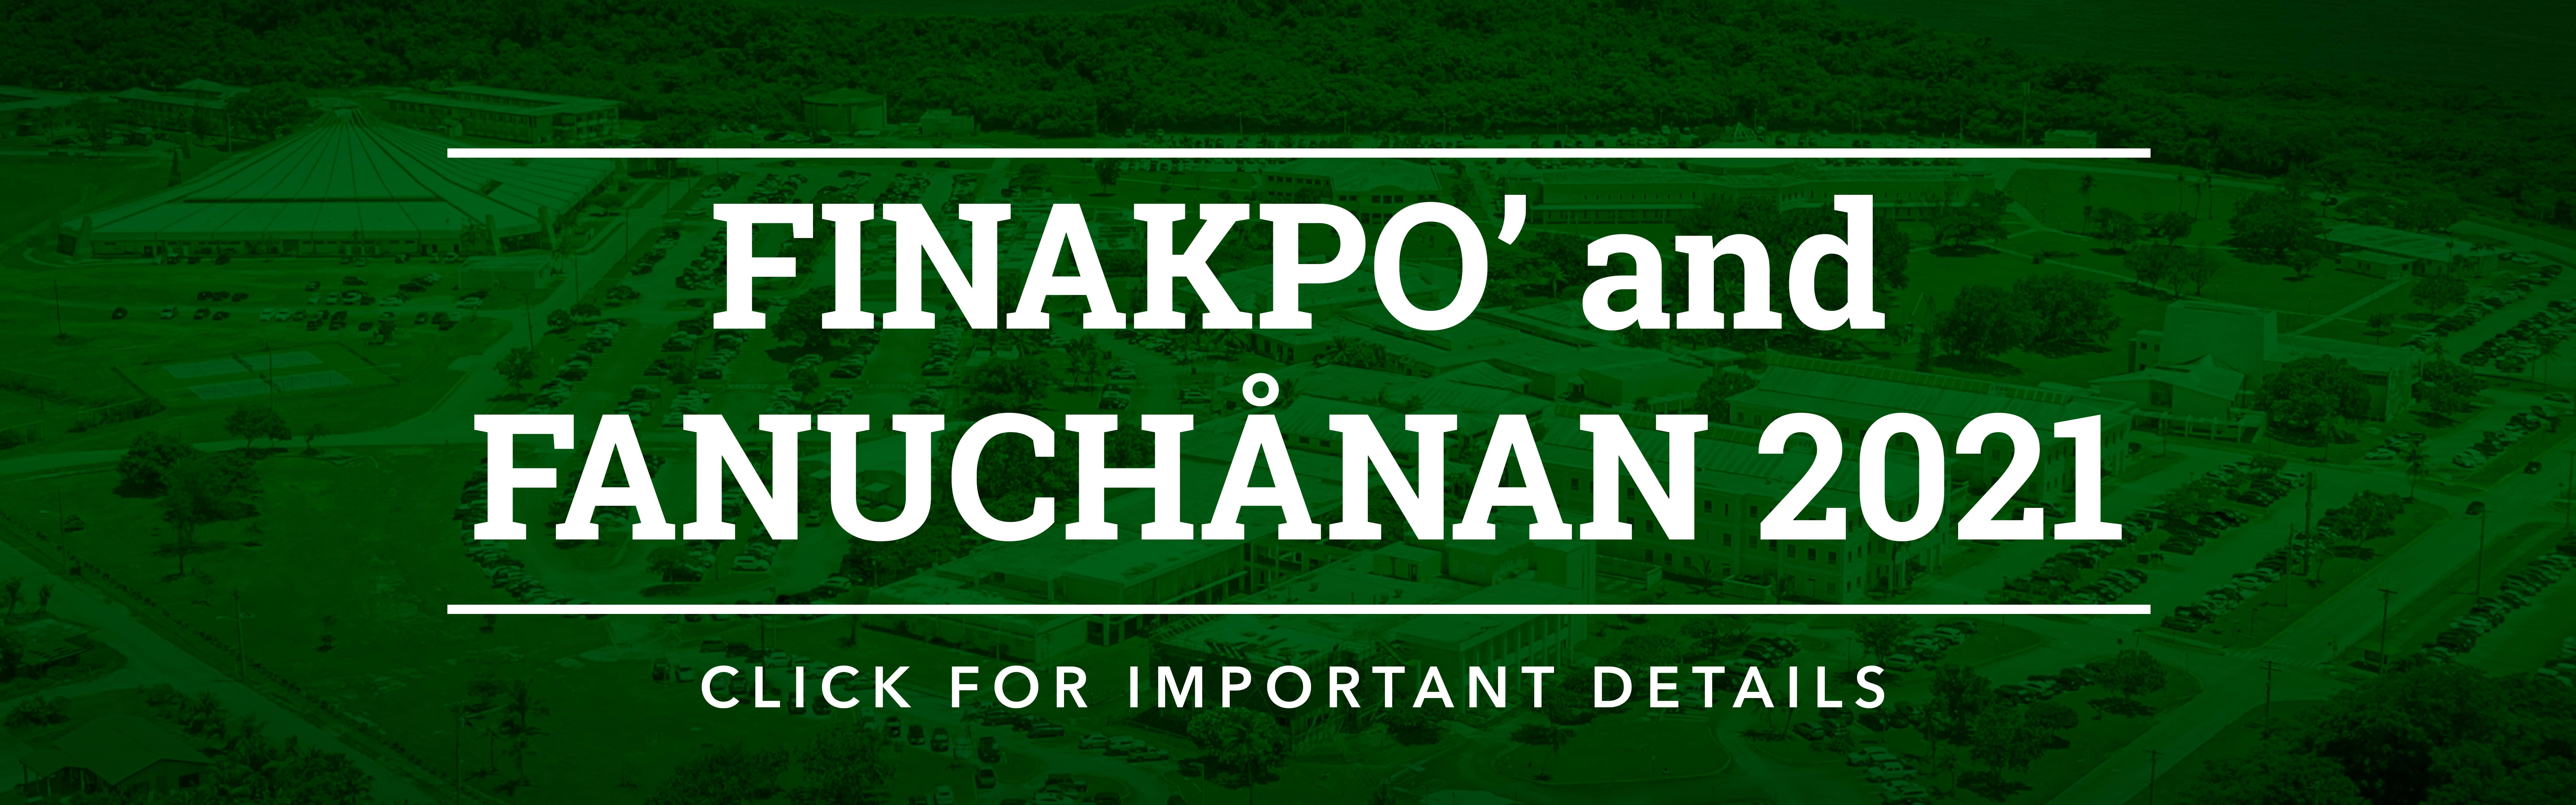 Click here for important details regarding Finakpo' and Fanuchånan 2021